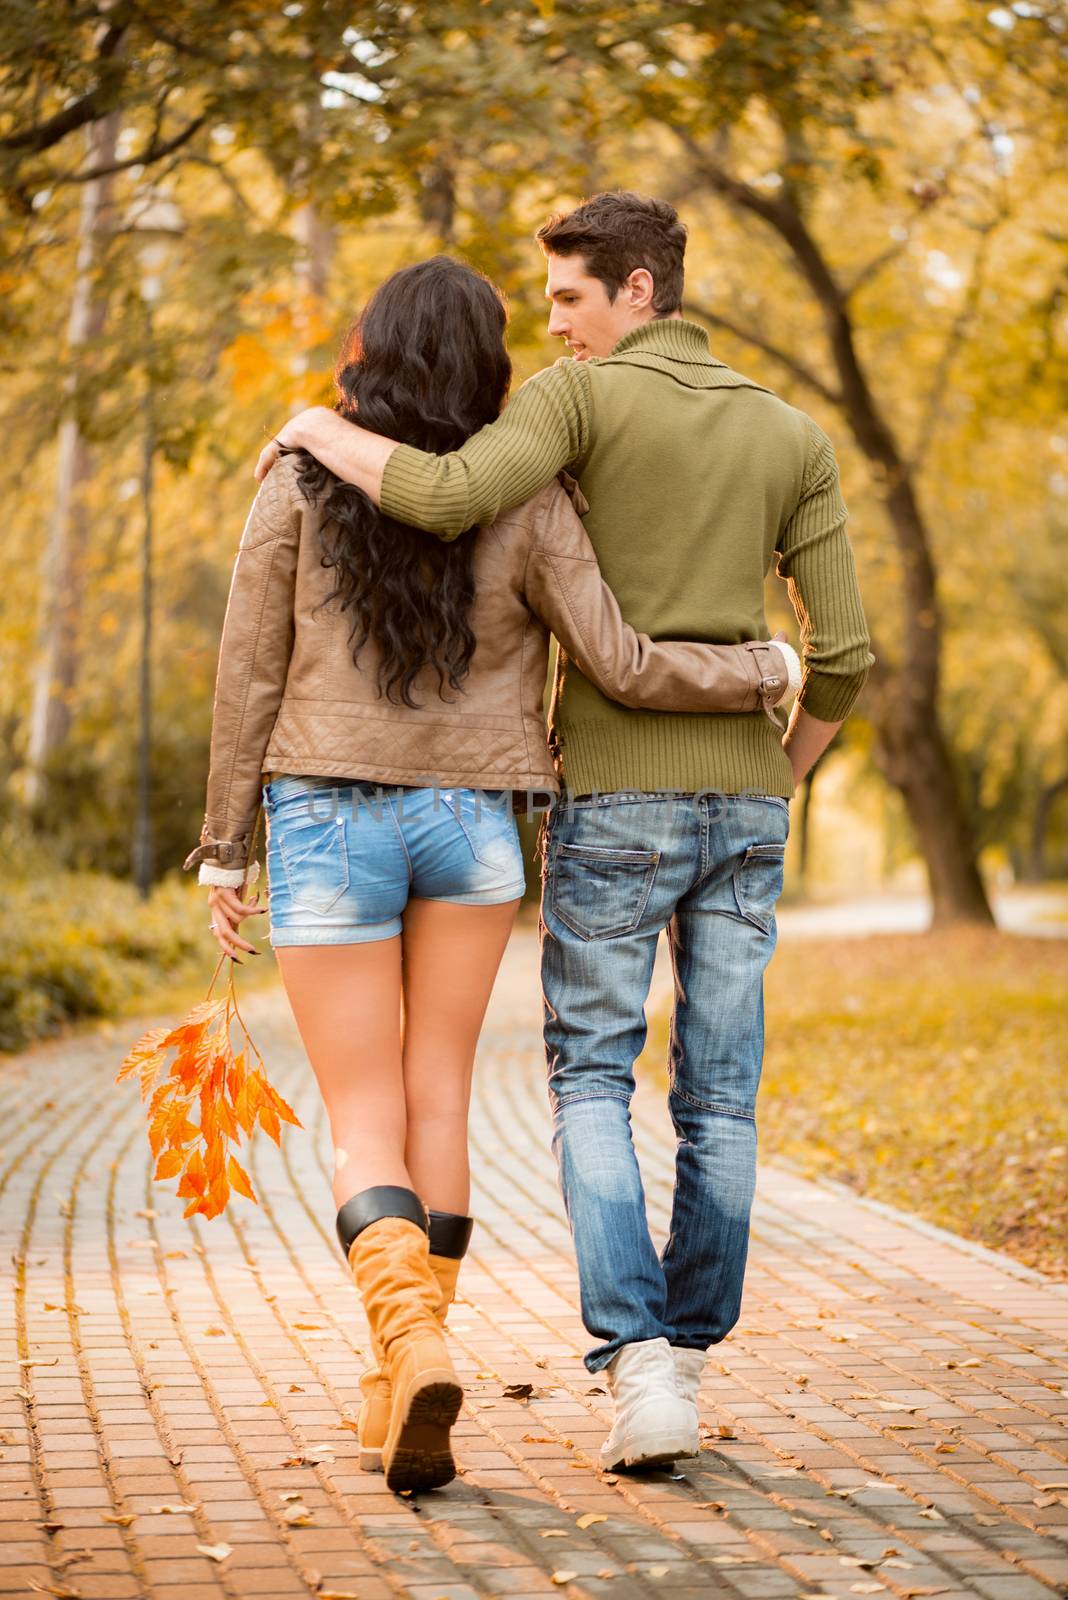 Loving young couple walking and enjoying autumn day in the park.